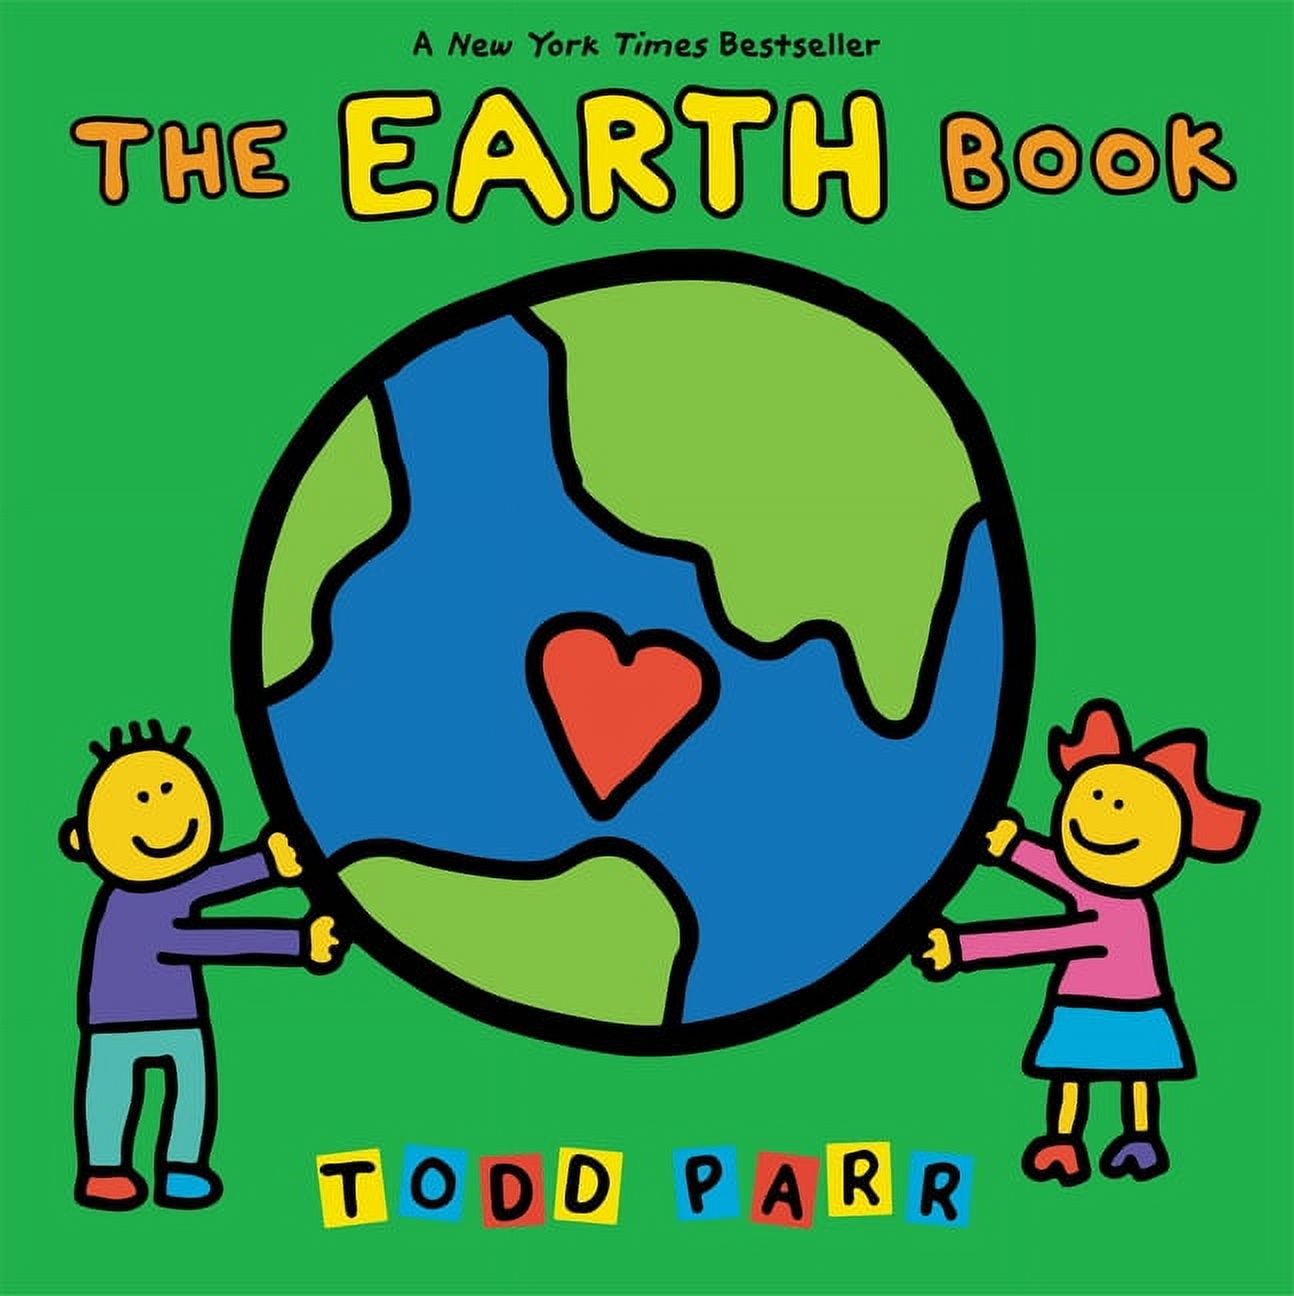 The EARTH Book (Hardcover) - image 1 of 1